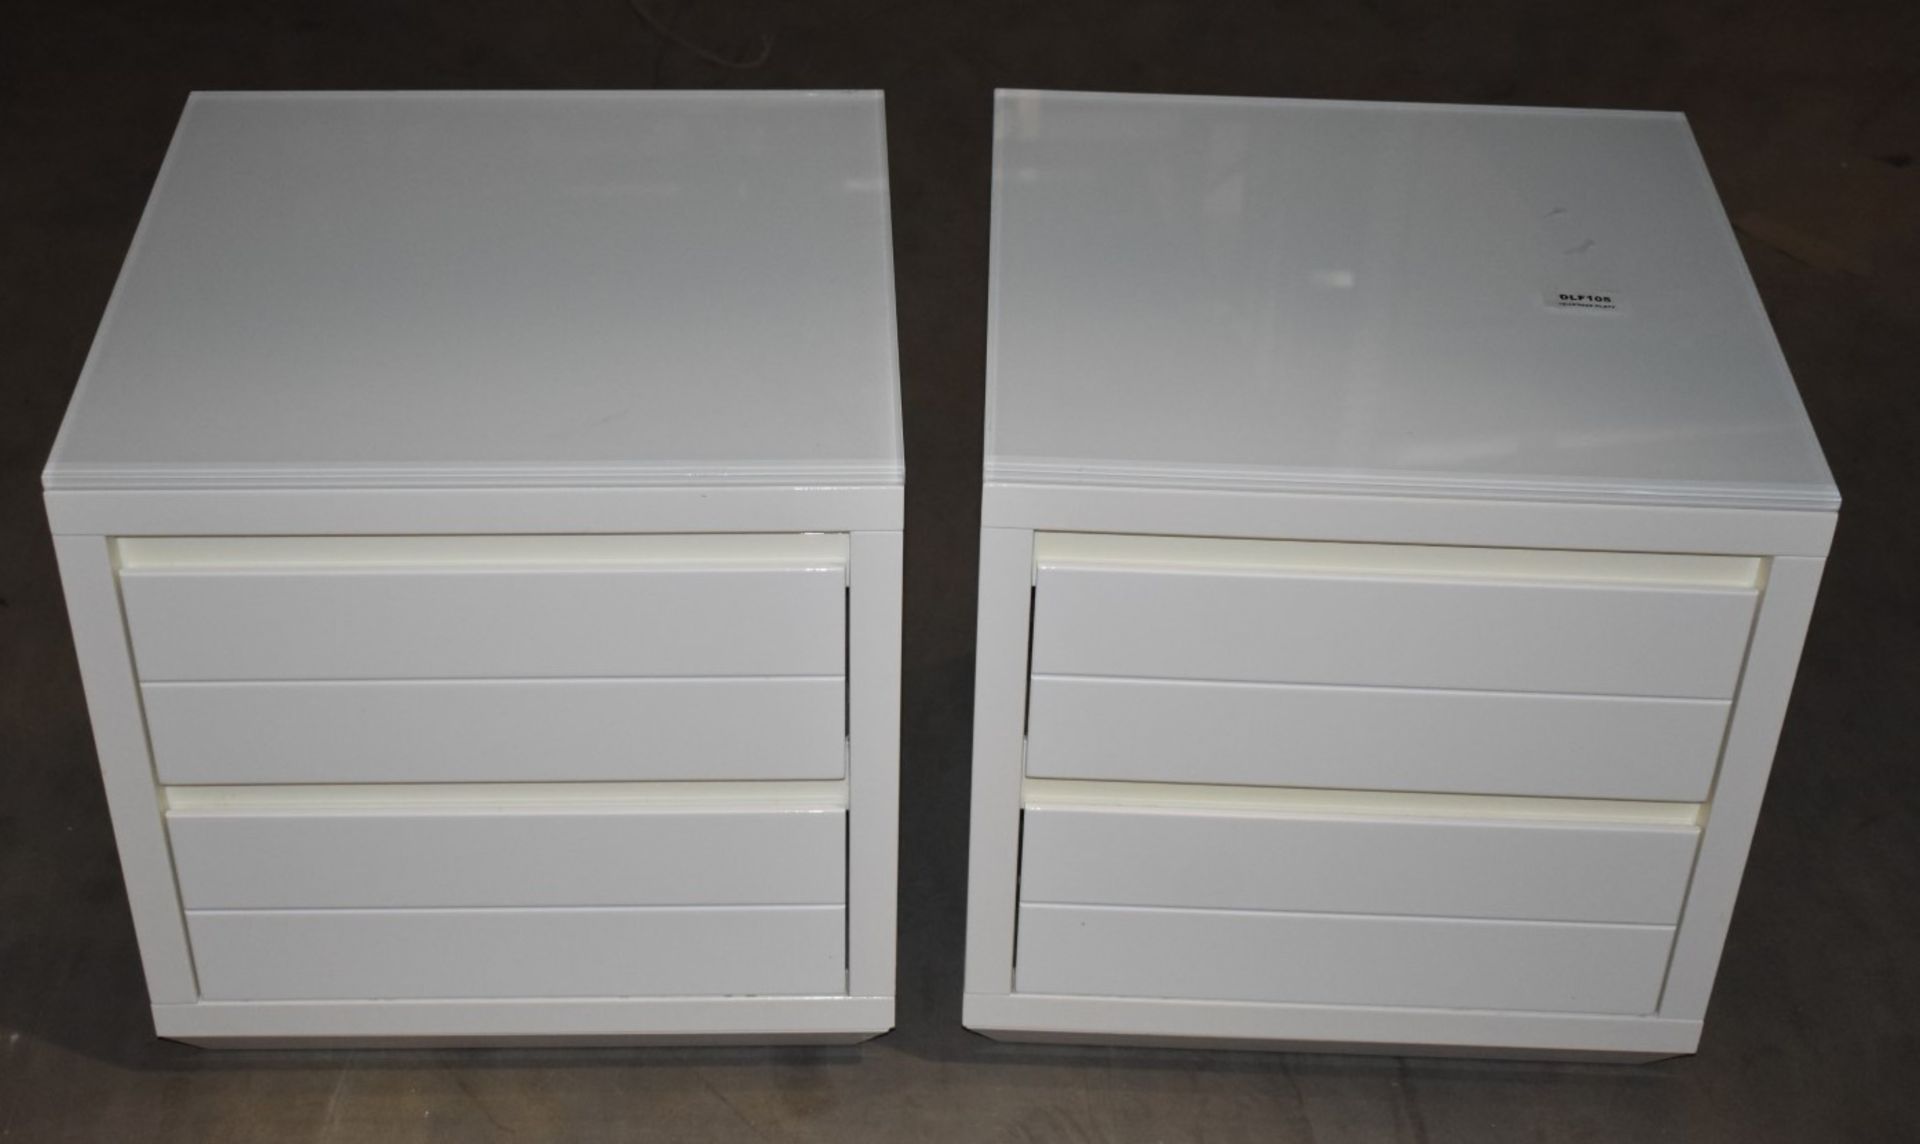 1 Pair of Casabella Adria Bedside Drawers - White Gloss With Glass Top and Soft Close Drawers  - - Image 4 of 6